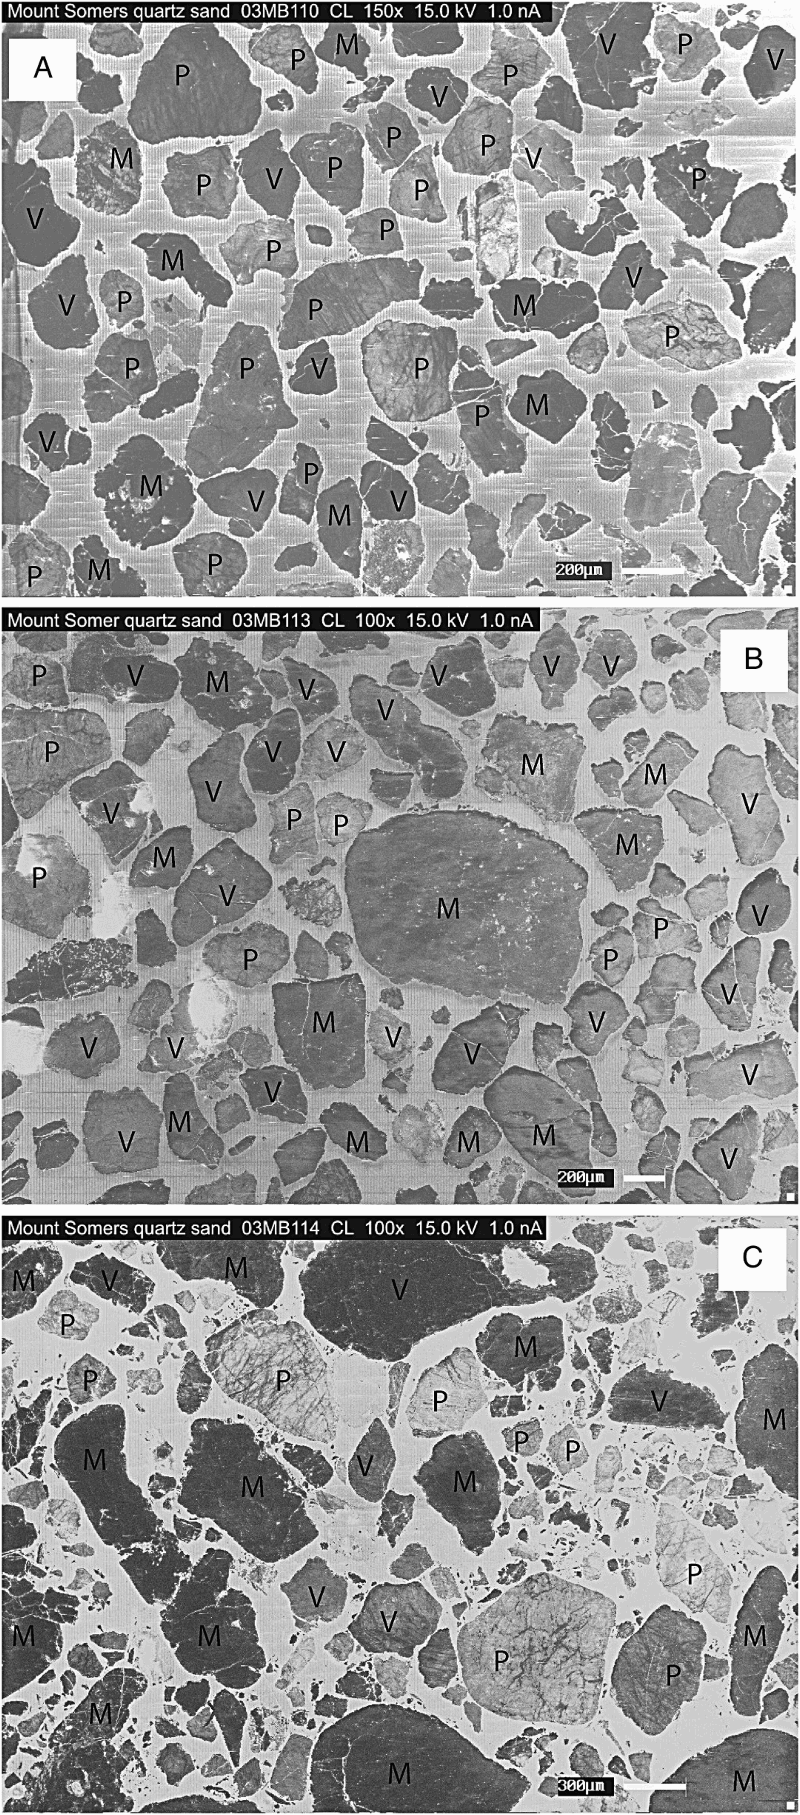 Figure 6. Example of SEM-CL images of sand samples A, 03MB110, B, 03MB113, and C, 03MB114. All samples show volcanic, plutonic and metamorphic quartz grains. Volcanic, angular quartz grains with a homogeneous CL response are more common in the finer-grained fraction. Plutonic quartz grains can be recognised by the ‘spider webs’ of microcracks. The classification as different quartz types is based on SEM-CL images and optical analysis (extinction behaviour etc.) of the same quartz crystals. See Figure 4 for SEM-CL images of examples of all three quartz types from potential source rocks.